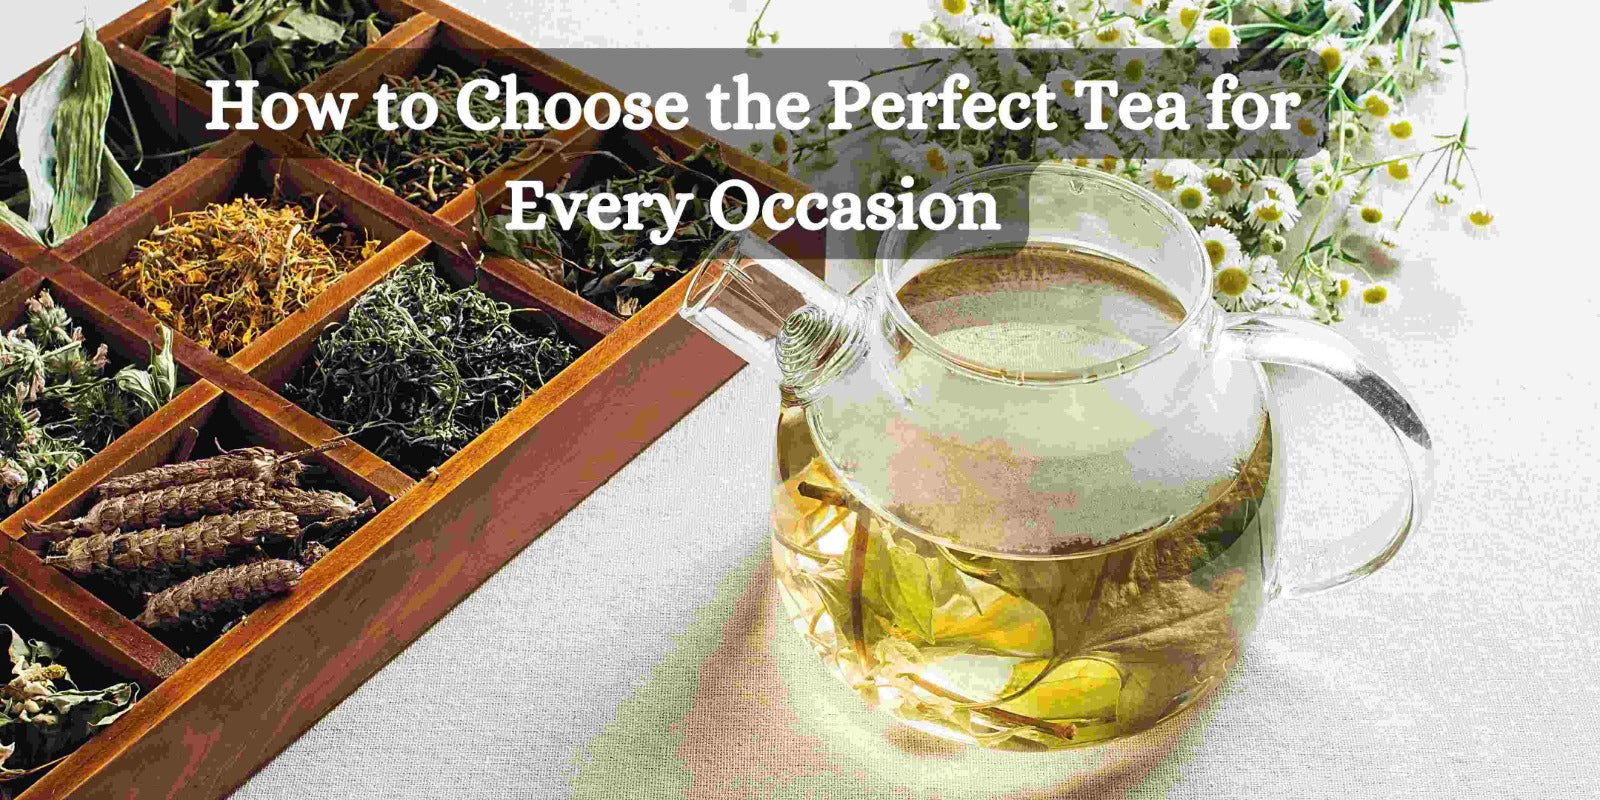 How to Choose the Perfect Tea for Every Occasion